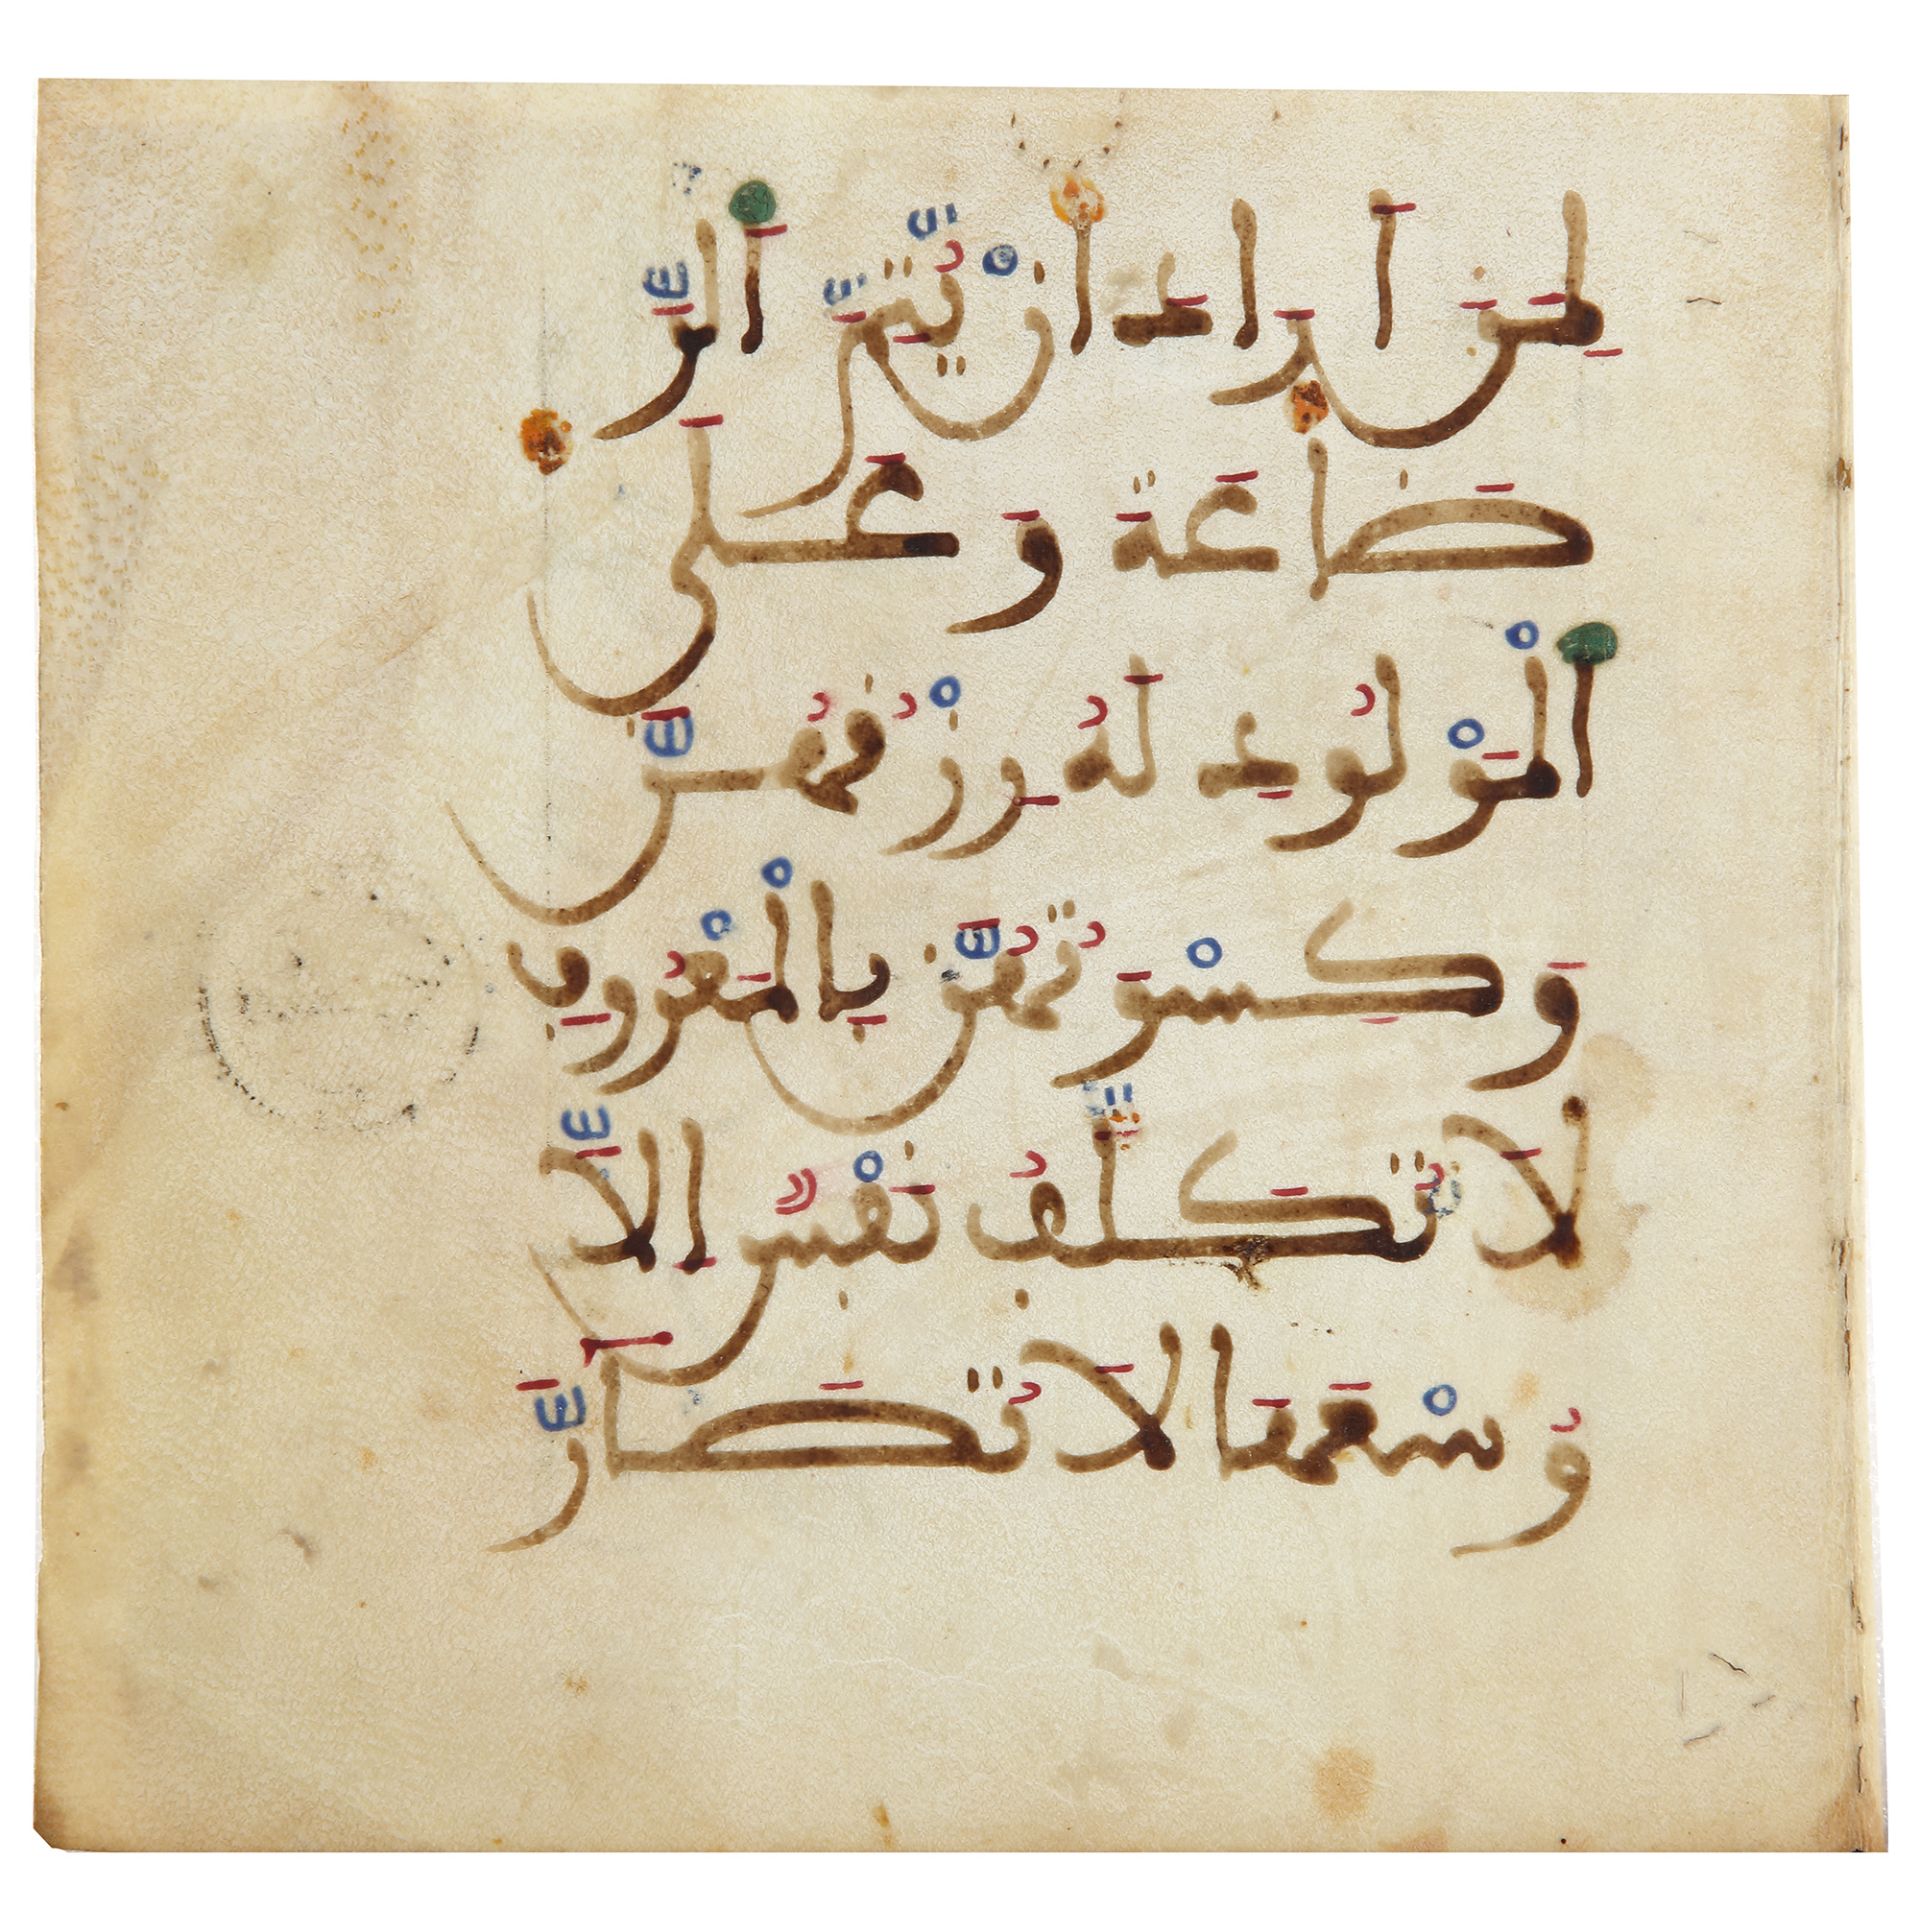 TWO MAGHRIBI QURAN FOLIOS, NORTH AFRICA OR ANDALUSIA, 12TH-13TH CENTURY - Image 3 of 3